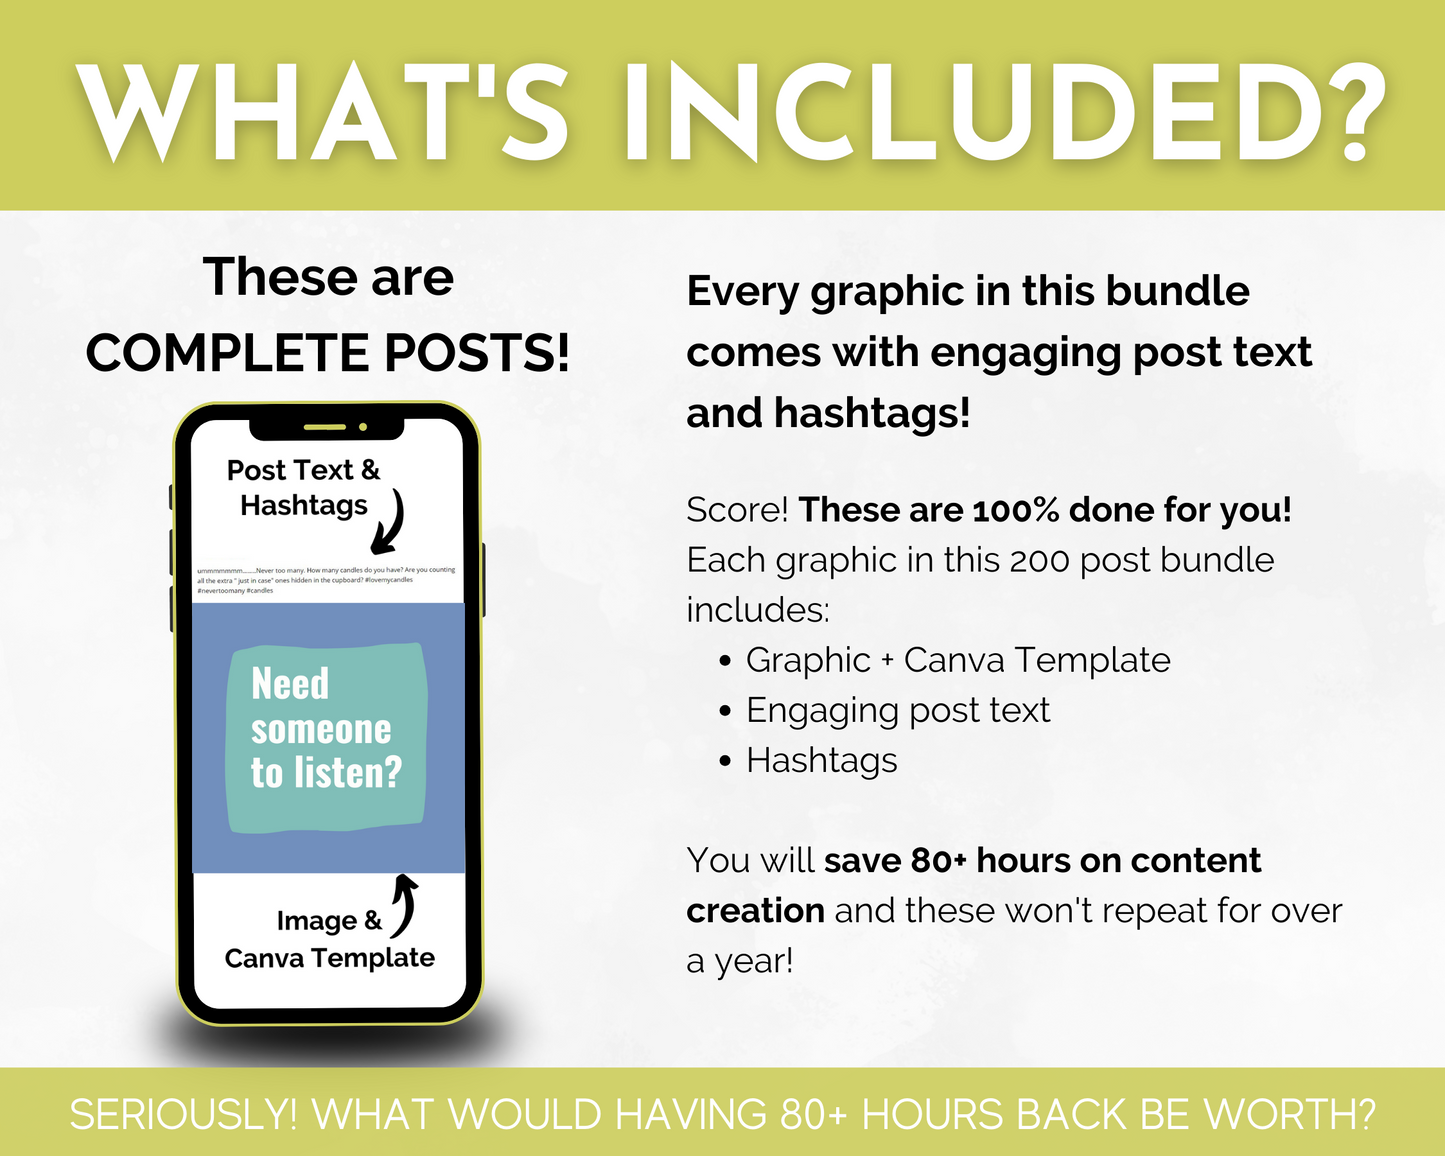 What's included in the Mental Health Social Media Post Bundle with Canva Templates for mental health professionals on social media offered by Socially Inclined?